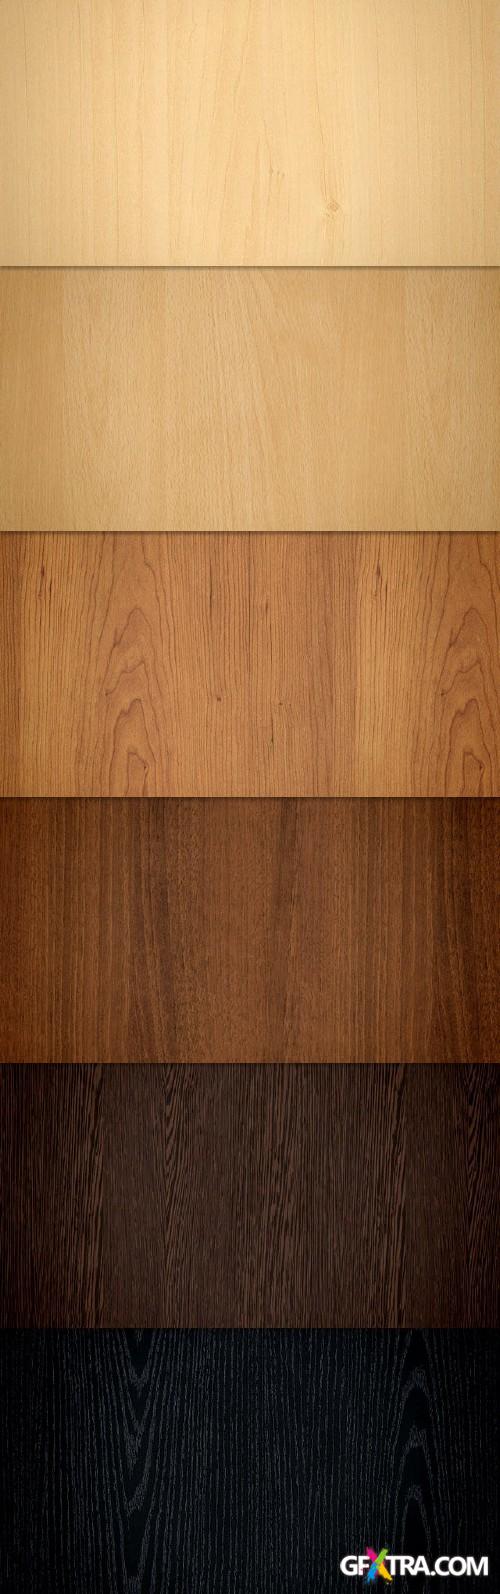 Wood Pattern Backgrounds